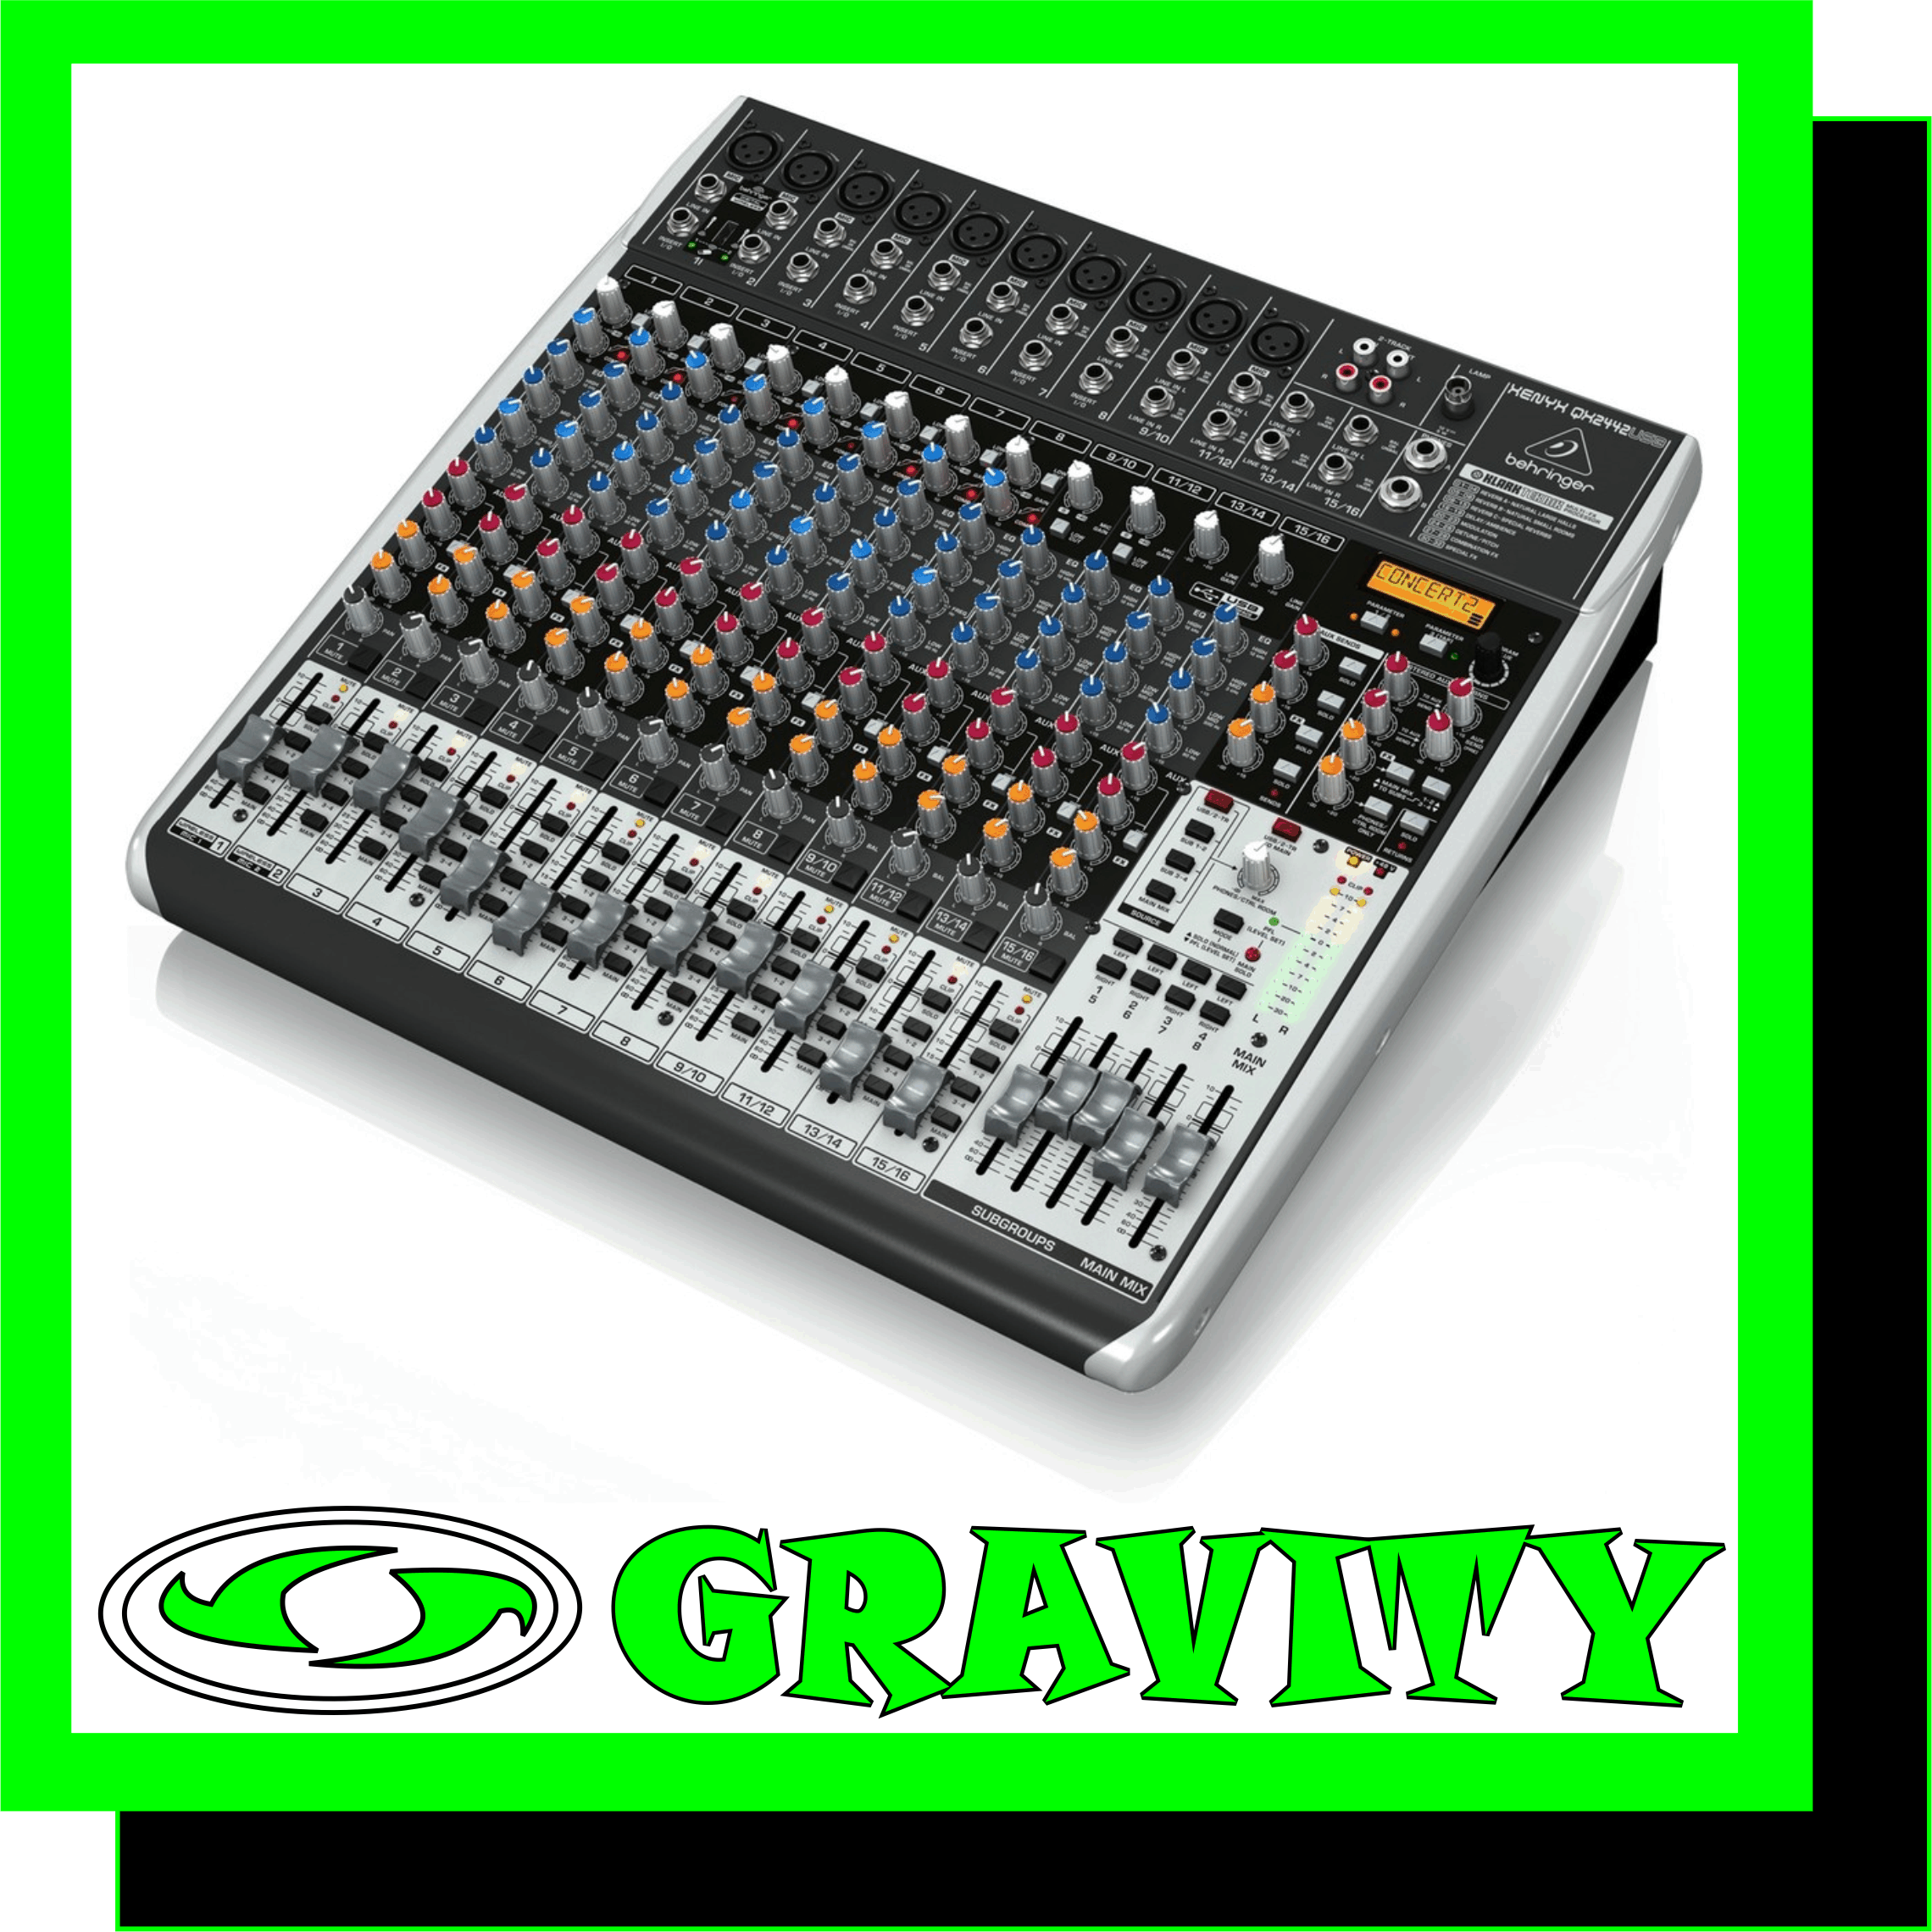 Behringer XENYX QX2442USB 24-Input 4/2-Bus Mixer with XENYX Mic  Product Features: -Premium ultra-low noise, high headroom mixer -10 state-of-the-art, phantom-powered XENYX Mic Preamps comparable to stand-alone boutique preamps -8 studio-grade compressors with super-easy “one-knob” functionality and control LED for professional vocal and instrumental sound -Ultra-high quality KLARK TEKNIK FX processor with LCD display, dual-parameters, Tap function and storable user parameter settings -“Wireless-ready” for high-quality BEHRINGER digital wireless system (not included) -Built-in stereo USB/Audio Interface to connect directly to your computer. Free audio recording, editing and podcasting software plus 150 instrument/effect plug-ins  downloadable at behringer.com -Neo-classic “British” 3-band EQs with semi-parametric mid band for warm and musical sound -Channel inserts and direct outputs on each mono channel plus main mix inserts for flexible connection of outboard equipment -4 aux sends per channel: 2 pre/post fader switchable for monitoring/FX applications, 2 post fader (for internal FX or as external send) -Clip LEDs, mute, main mix and subgroup routing switches, solo and PFL functions on all channels -4 subgroups with separate outputs for added routing flexibility; 4 multi-functional stereo aux returns with flexible routing -Control room/phones outputs with multi-input source matrix; rec inputs assignable to main mix or control room/phones outputs -Long-wearing 60-mm logarithmic-taper faders and sealed rotary controls -“Planet Earth” switching power supply for maximum flexibility (100 – 240 V~), noise-free audio, superior transient response plus low power consumption for energy saving -High-quality components and exceptionally rugged construction ensure long life -Conceived and designed by BEHRINGER Germany  The feature-packed XENYX QX2442USB mixer allows you to effortlessly achieve premium-quality sound thanks to its 10 onboard studio-grade XENYX Mic Preamps and ultra-musical British channel EQs with a semi-parametric mid band for warm and musical sound. And our easy-to-use one-knob compressors provide total dynamic control for the ultimate in punch and clarity. while respecting all the power and emotion you pack into every note. Add to this our KLARK TEKNIK FX processor with 32 studio-grade presets with dual addressable parameters. Tap function and storable user parameter settings and the QX2442USB becomes an incredibly versatile mixer for your live performances. But XENYX QX2442USB isnt just designed to handle your live gigs; they also provide the state-of-the-art tools you need to make stunning. professional- quality recordings. Along with their built-in USB/audio interfaces. the XENYX QX2442USB comes with all the recording and editing software needed to turn your computer system into a complete. high-performance home recording studio.